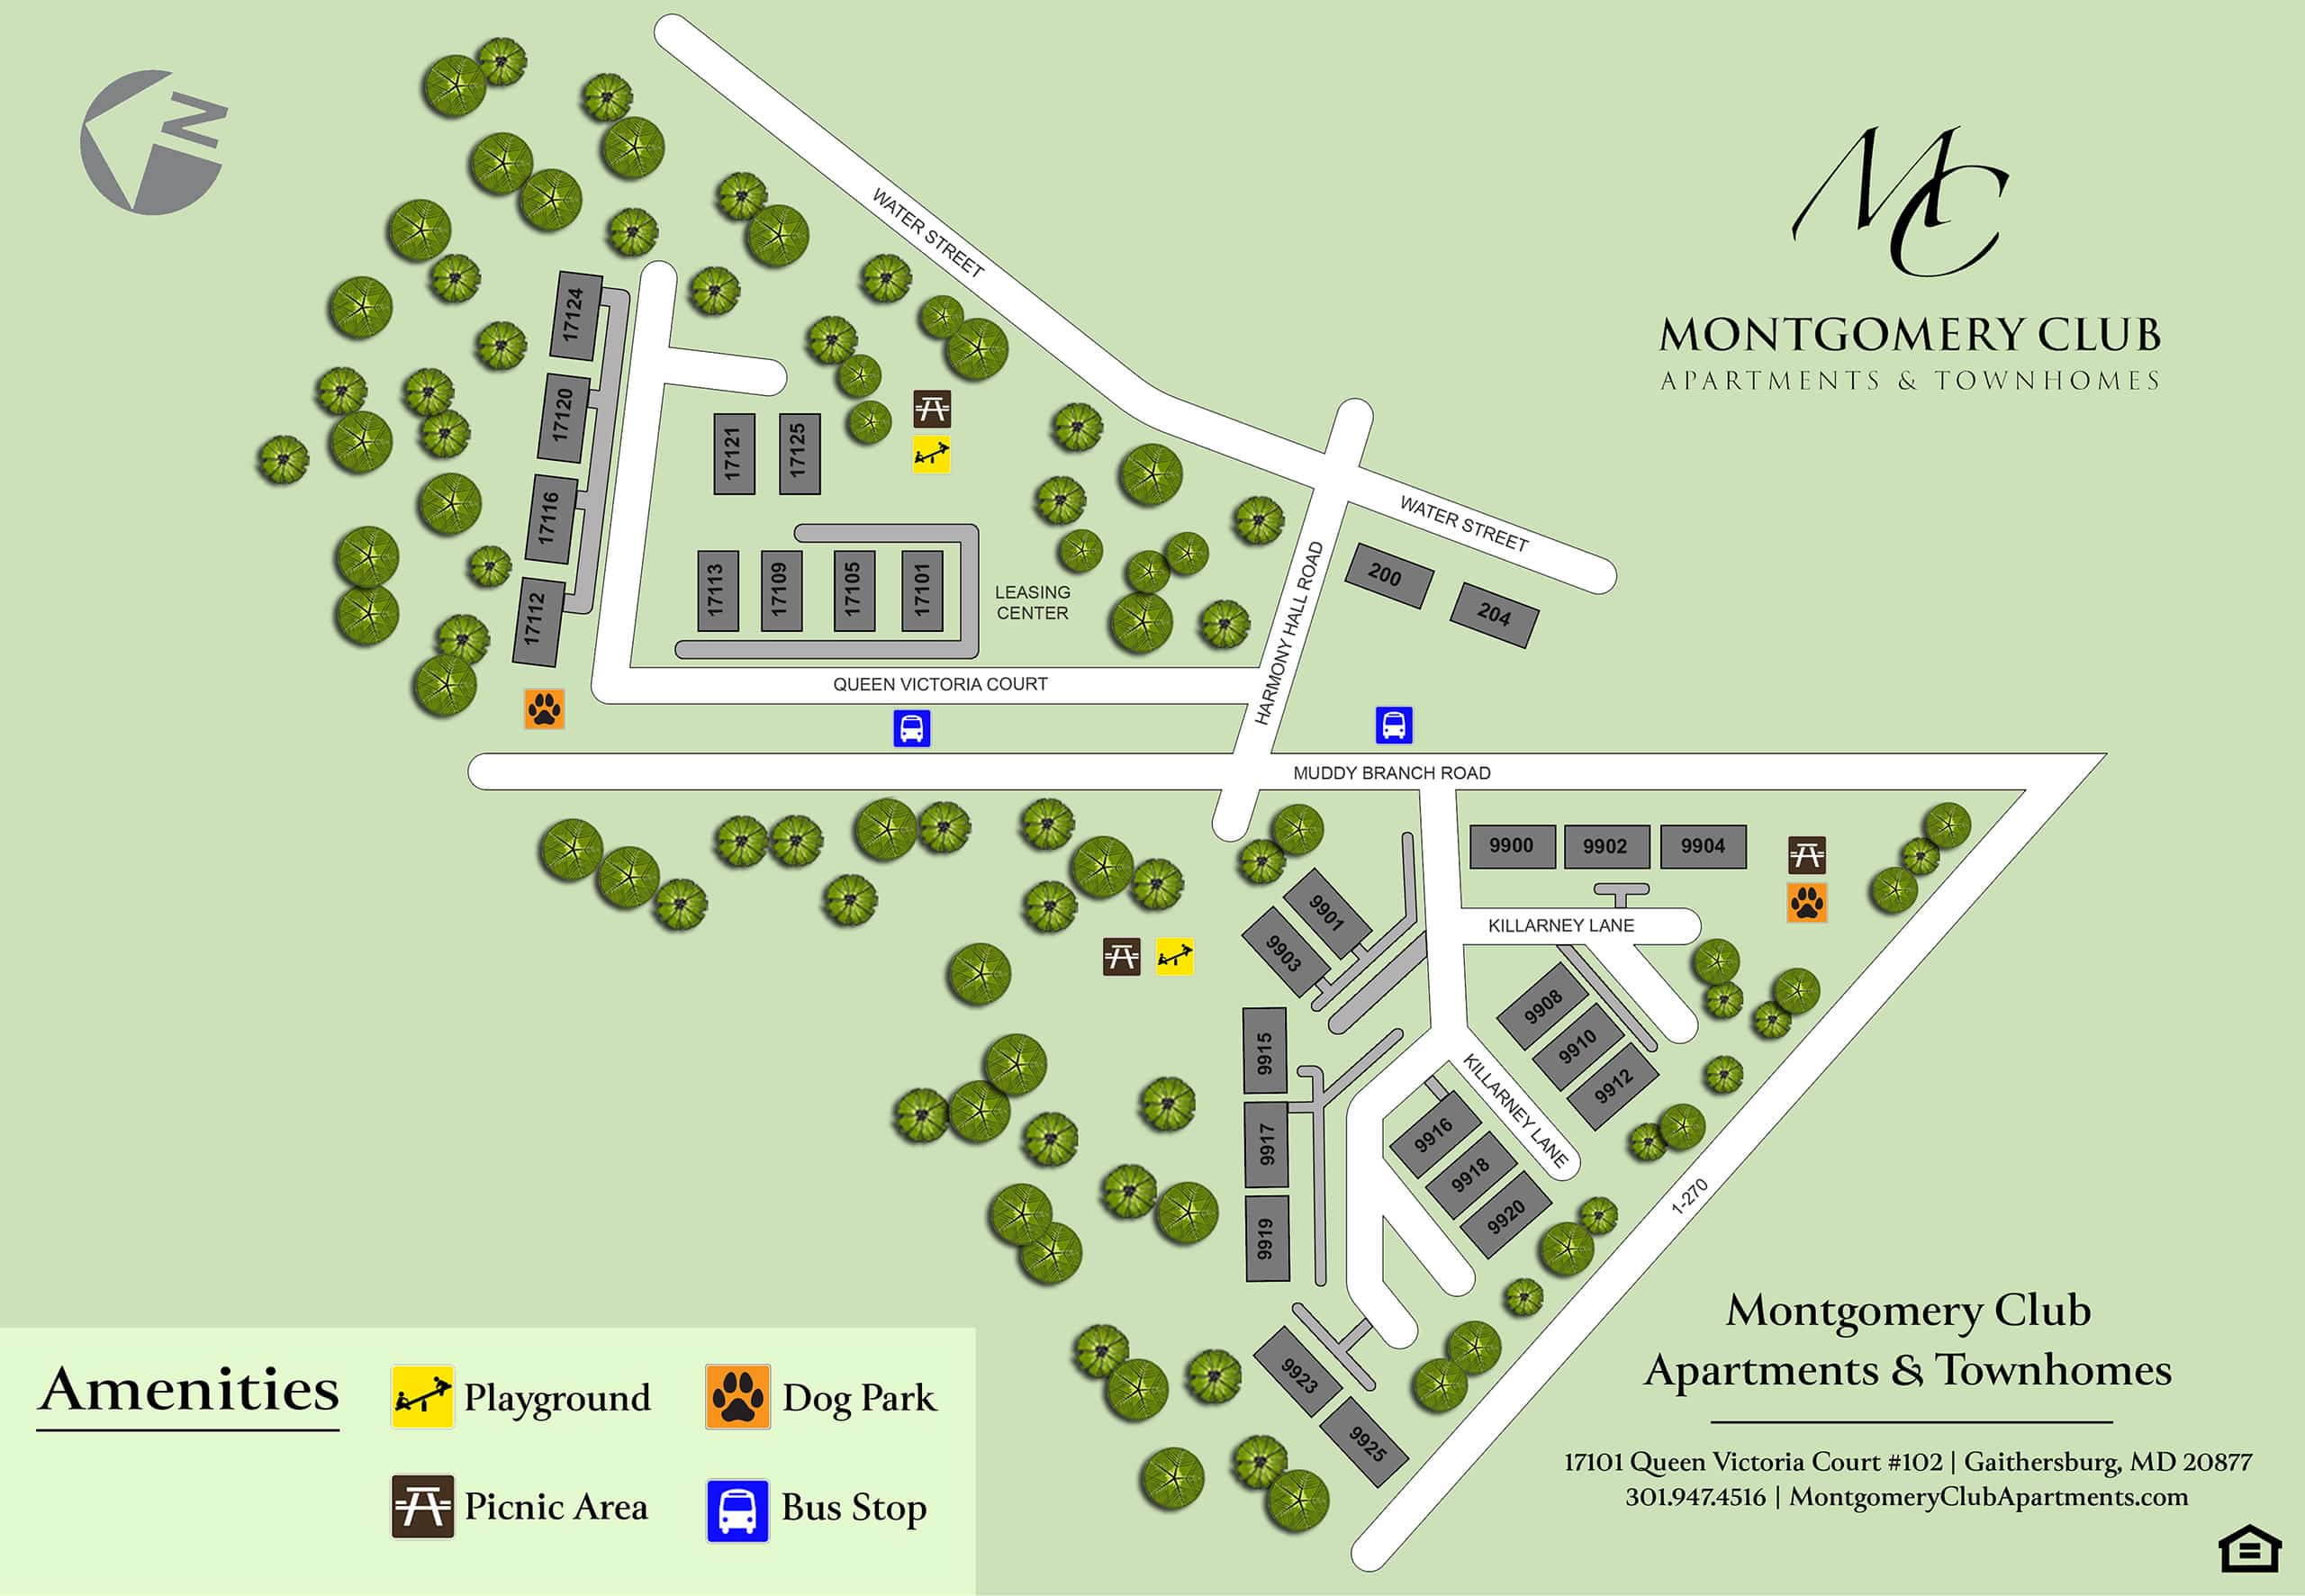 Illustrated site plan for Montgomery Club Apartments